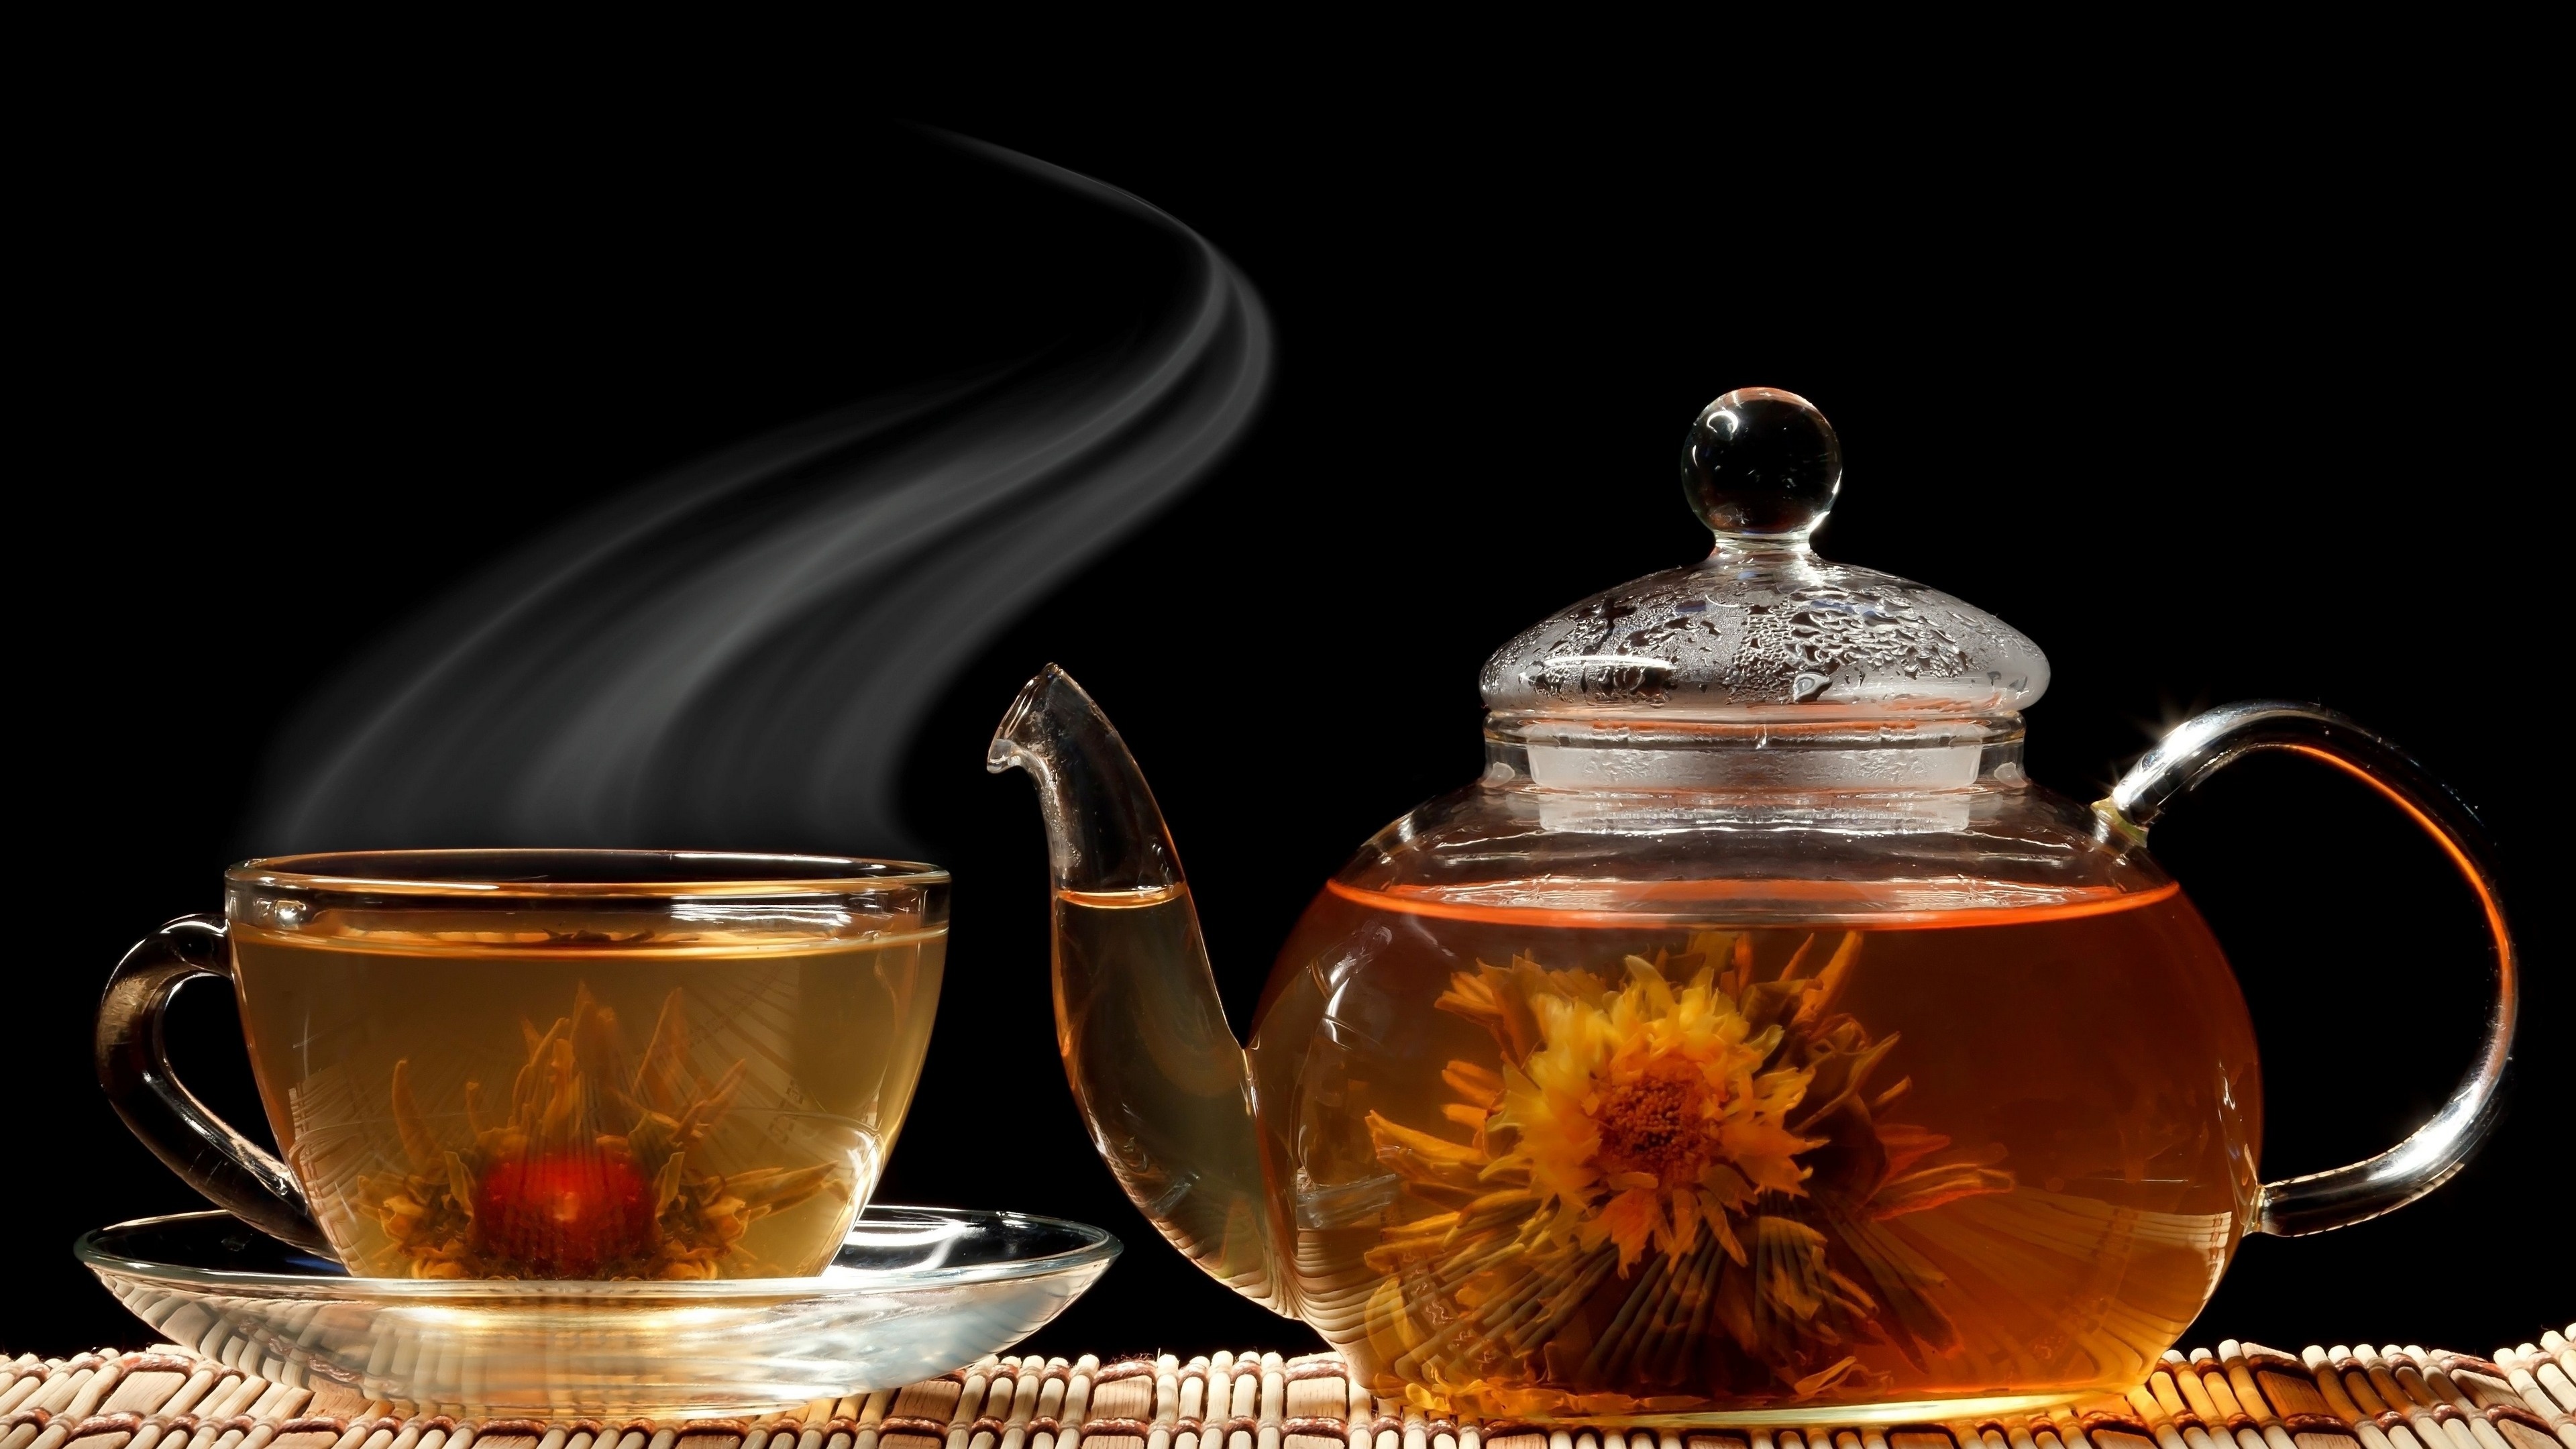 Tea: Made by binding tea leaves and flowers together into a bulb, Kettle. 3840x2160 4K Wallpaper.